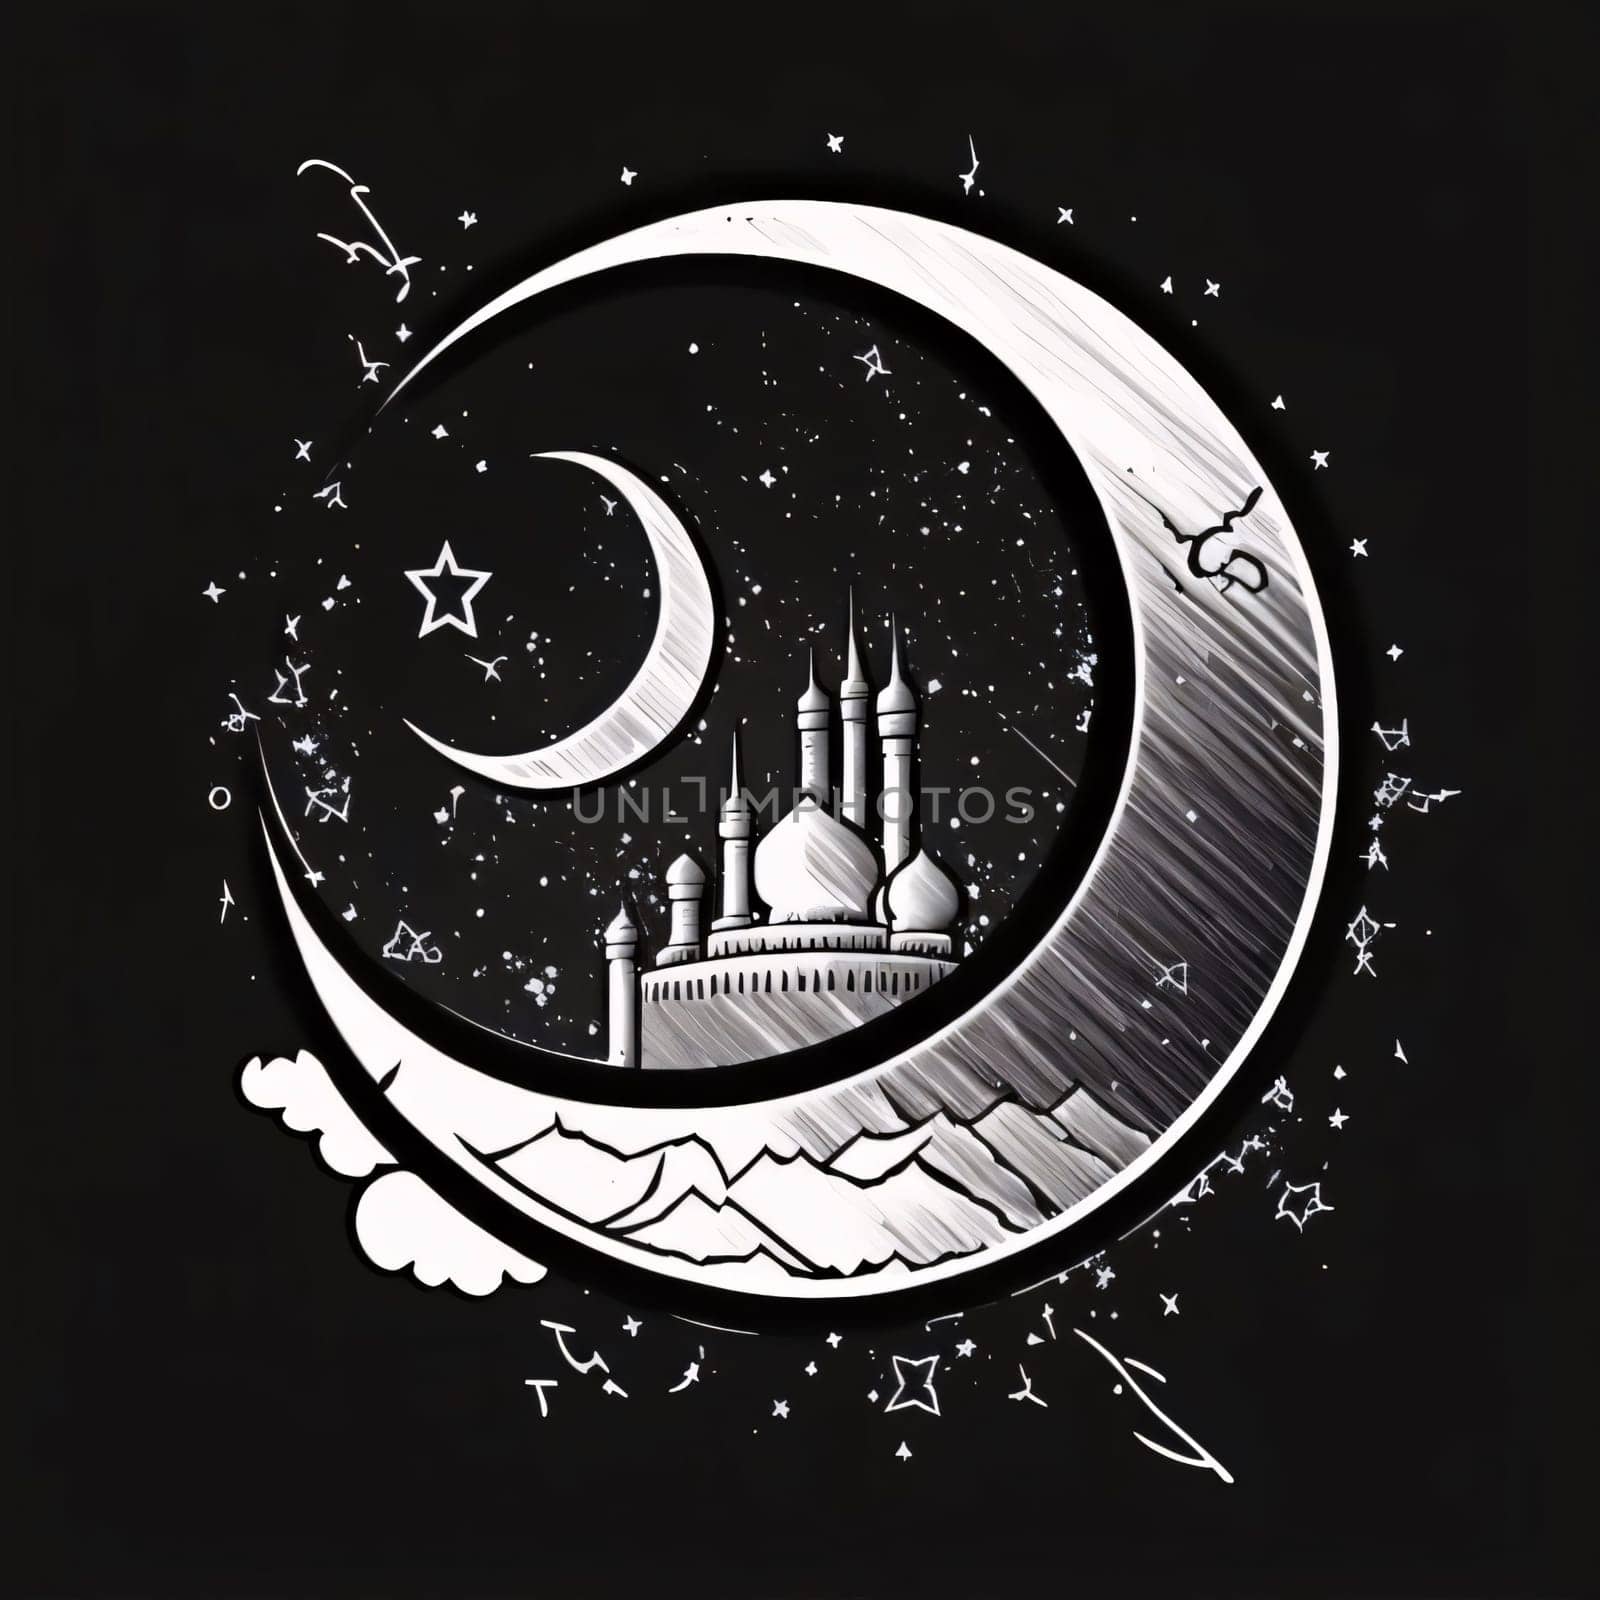 Illustration of a crescent moon on a dark background with an image of a mosque. by ThemesS